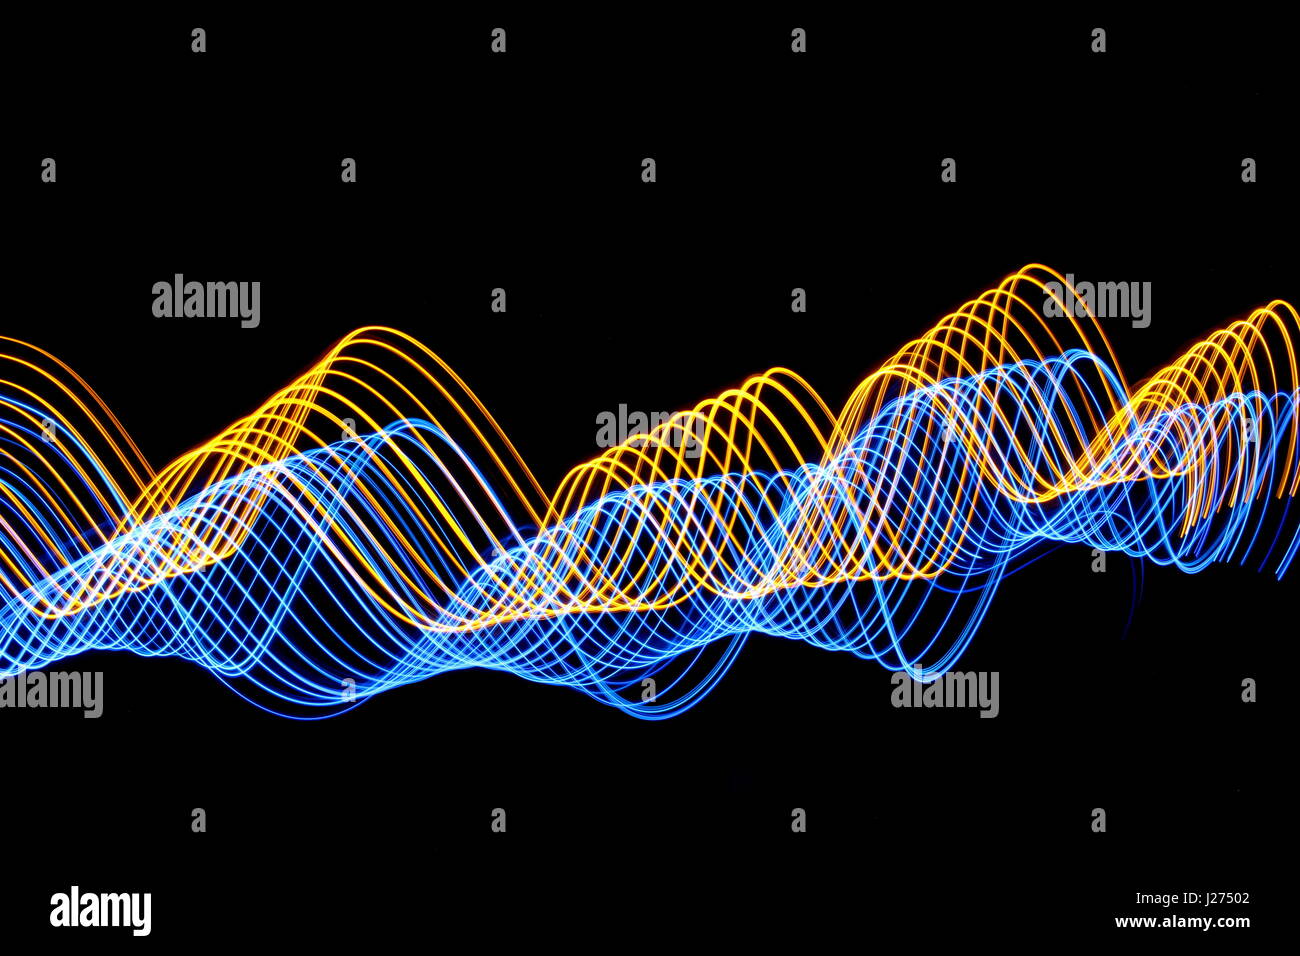 Long exposure photograph of neon blue and gold colour in an abstract wavy pattern against a black background. Light painting photography. Stock Photo